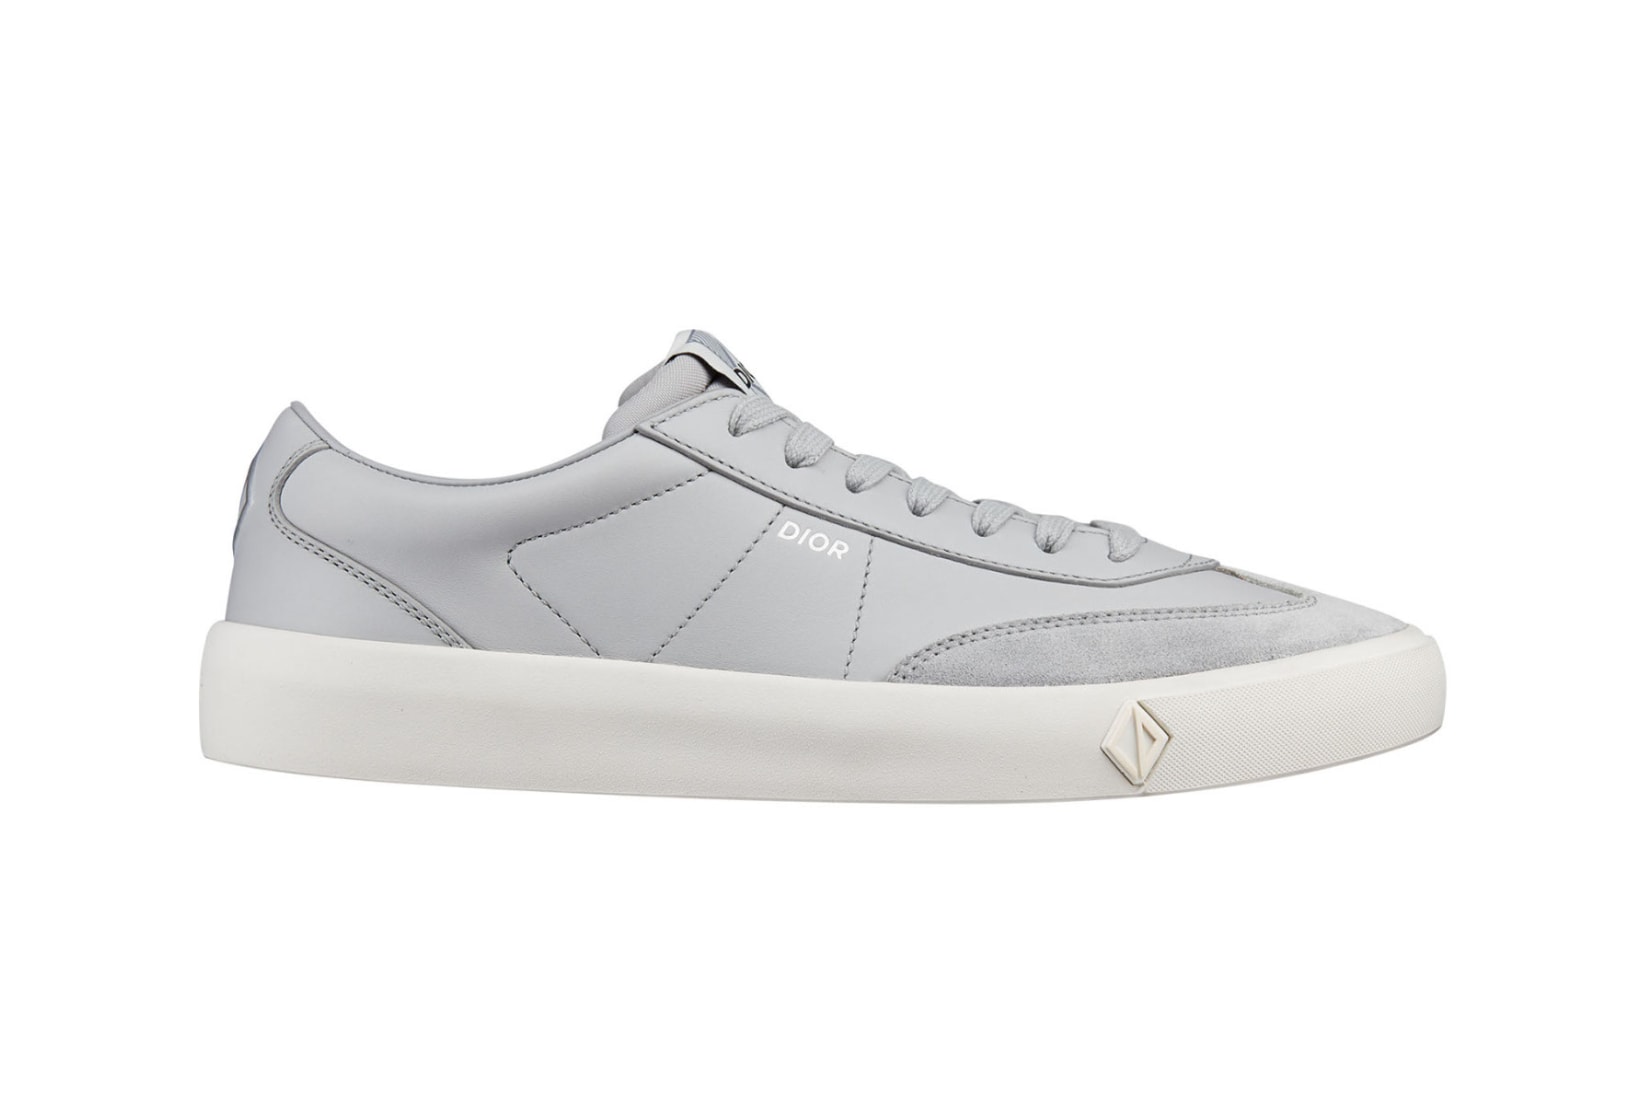 Dior Releases Neutral-Toned B101 Sneakers 